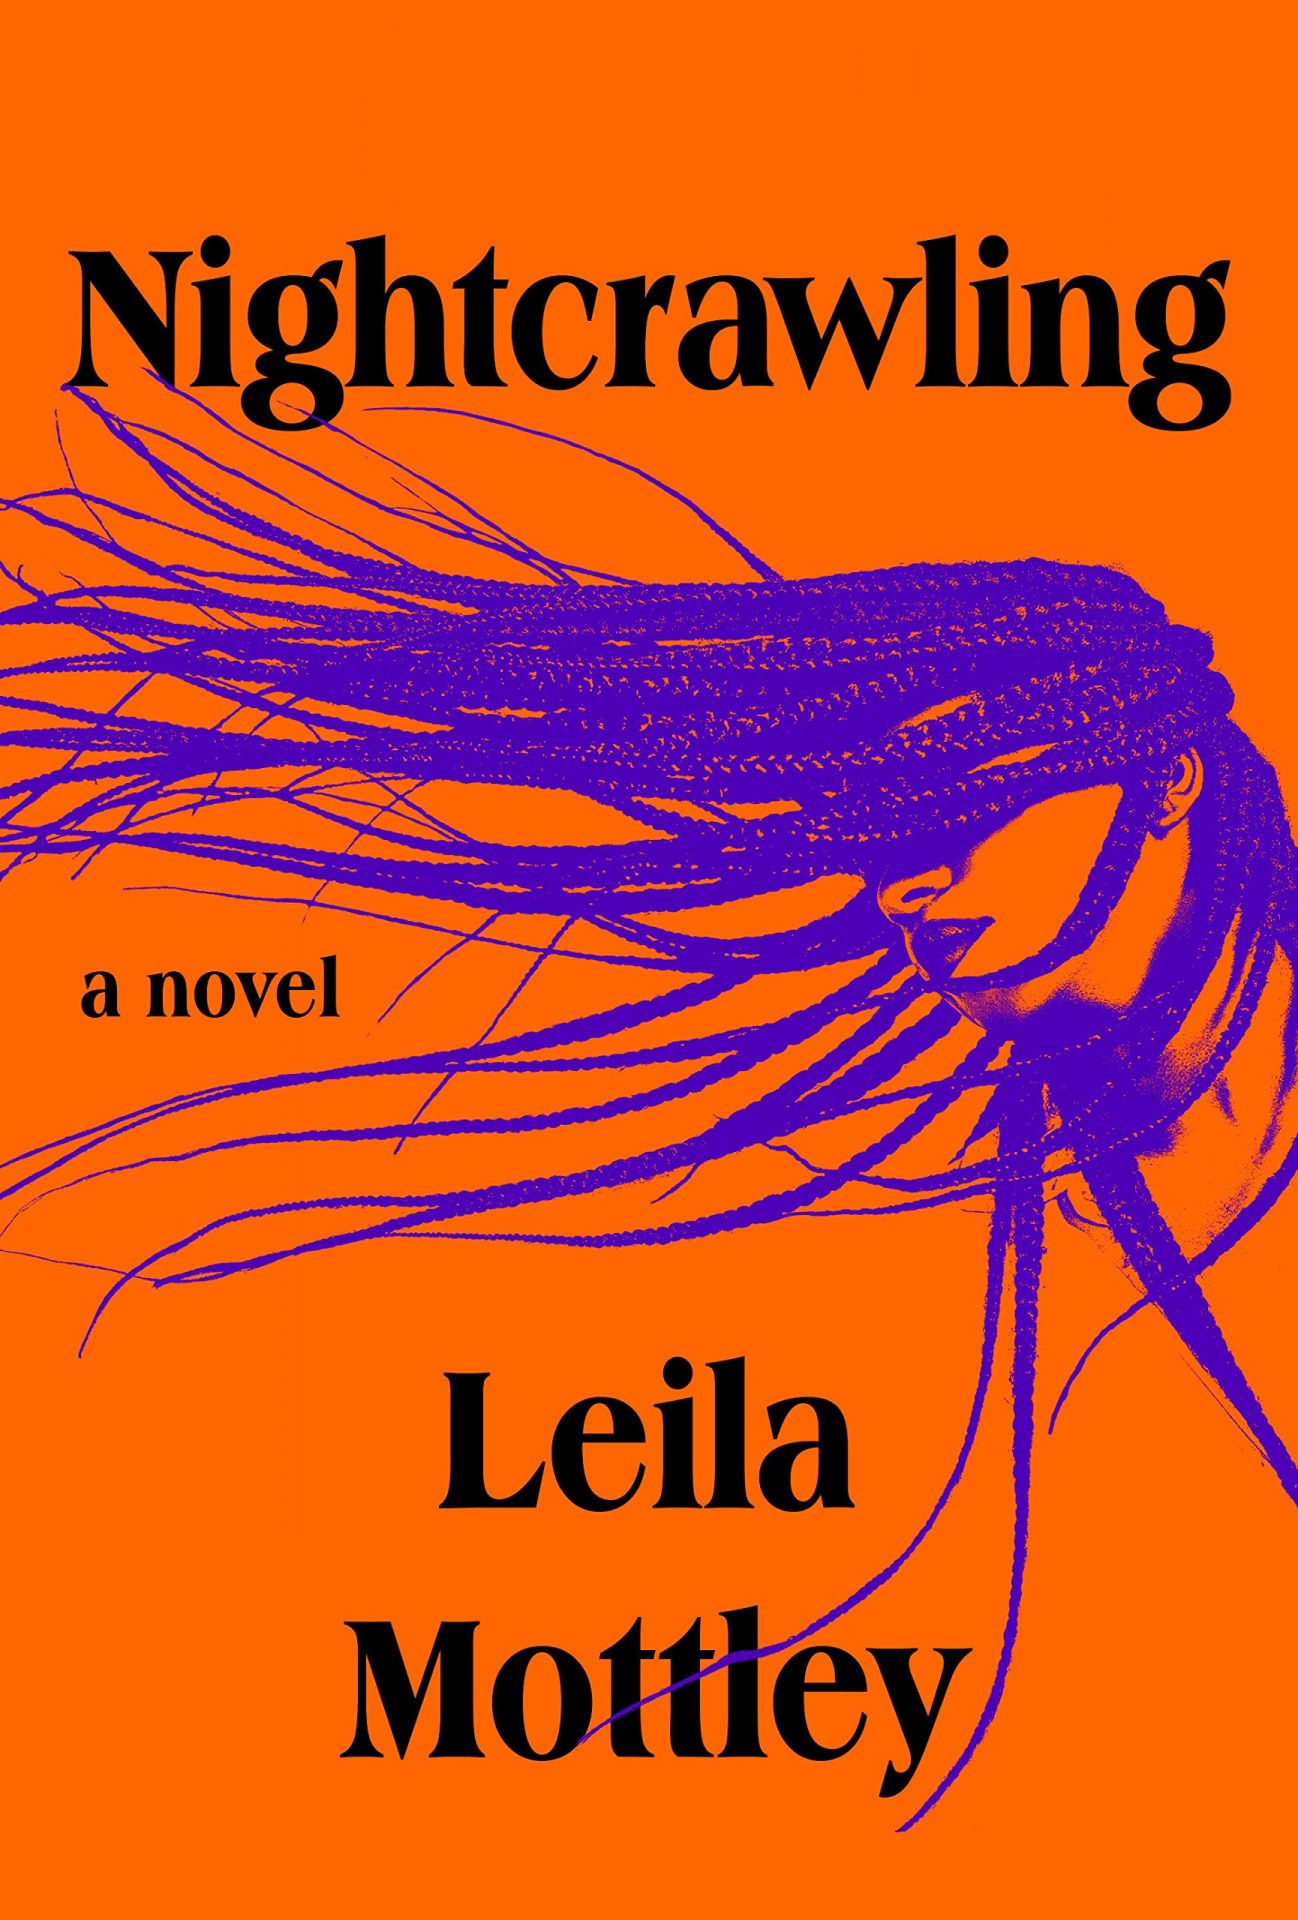 orange book cover background with blue silhouette of woman with braids for nightcrawling novel